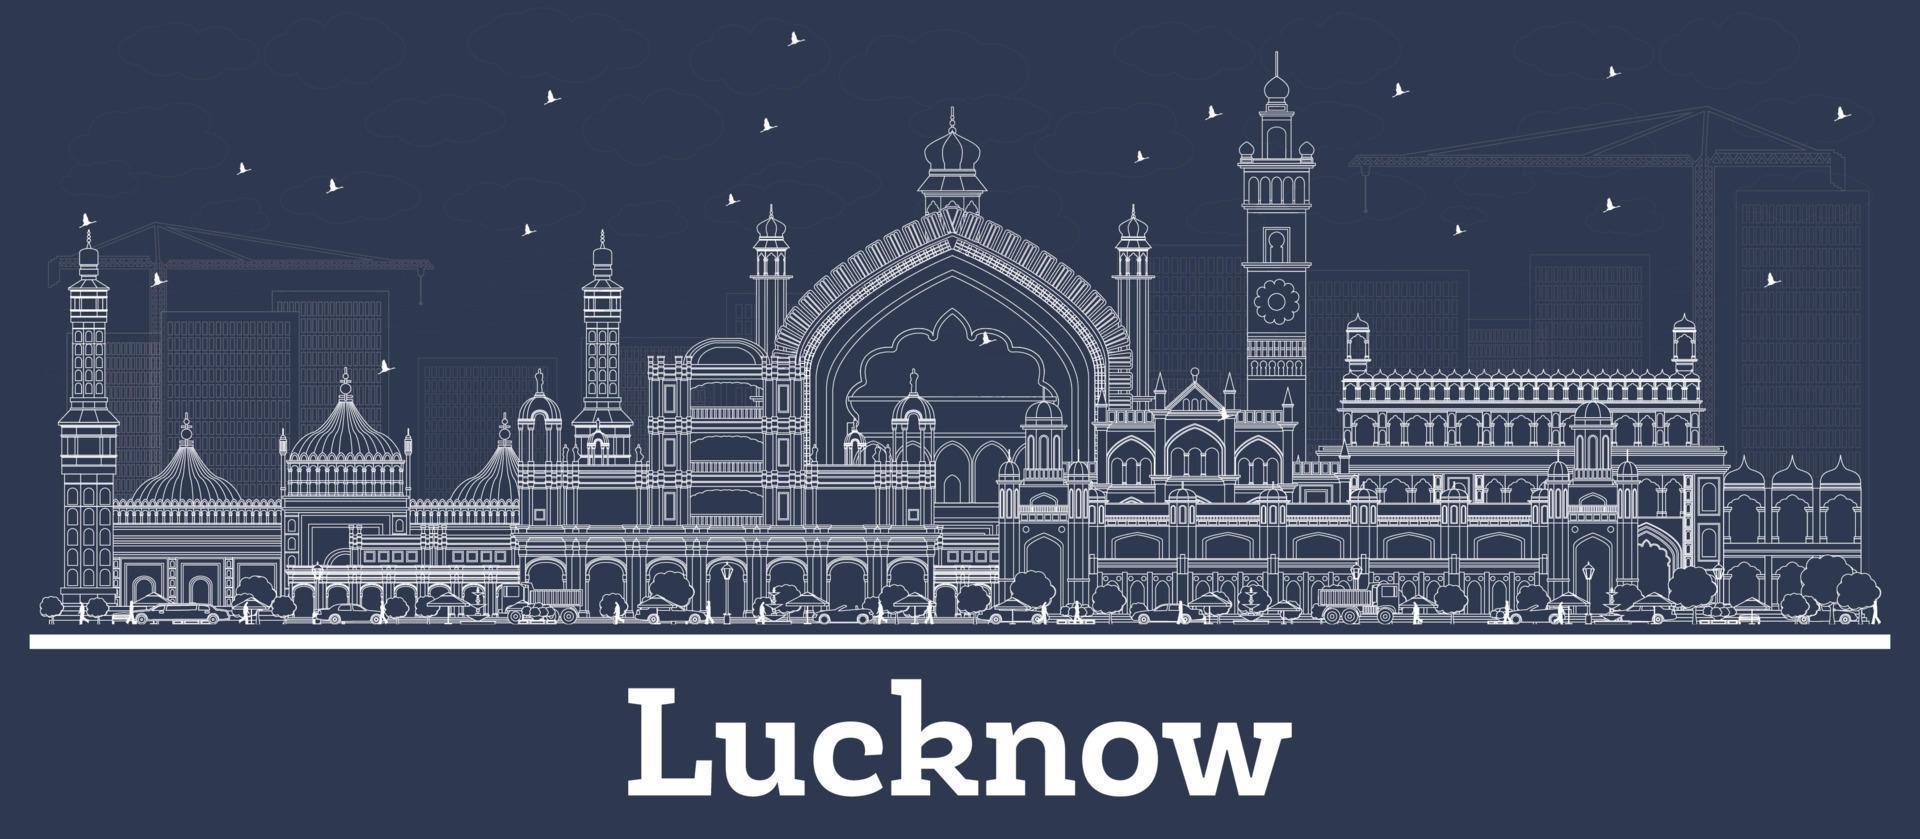 Outline Lucknow India City Skyline with White Buildings. vector